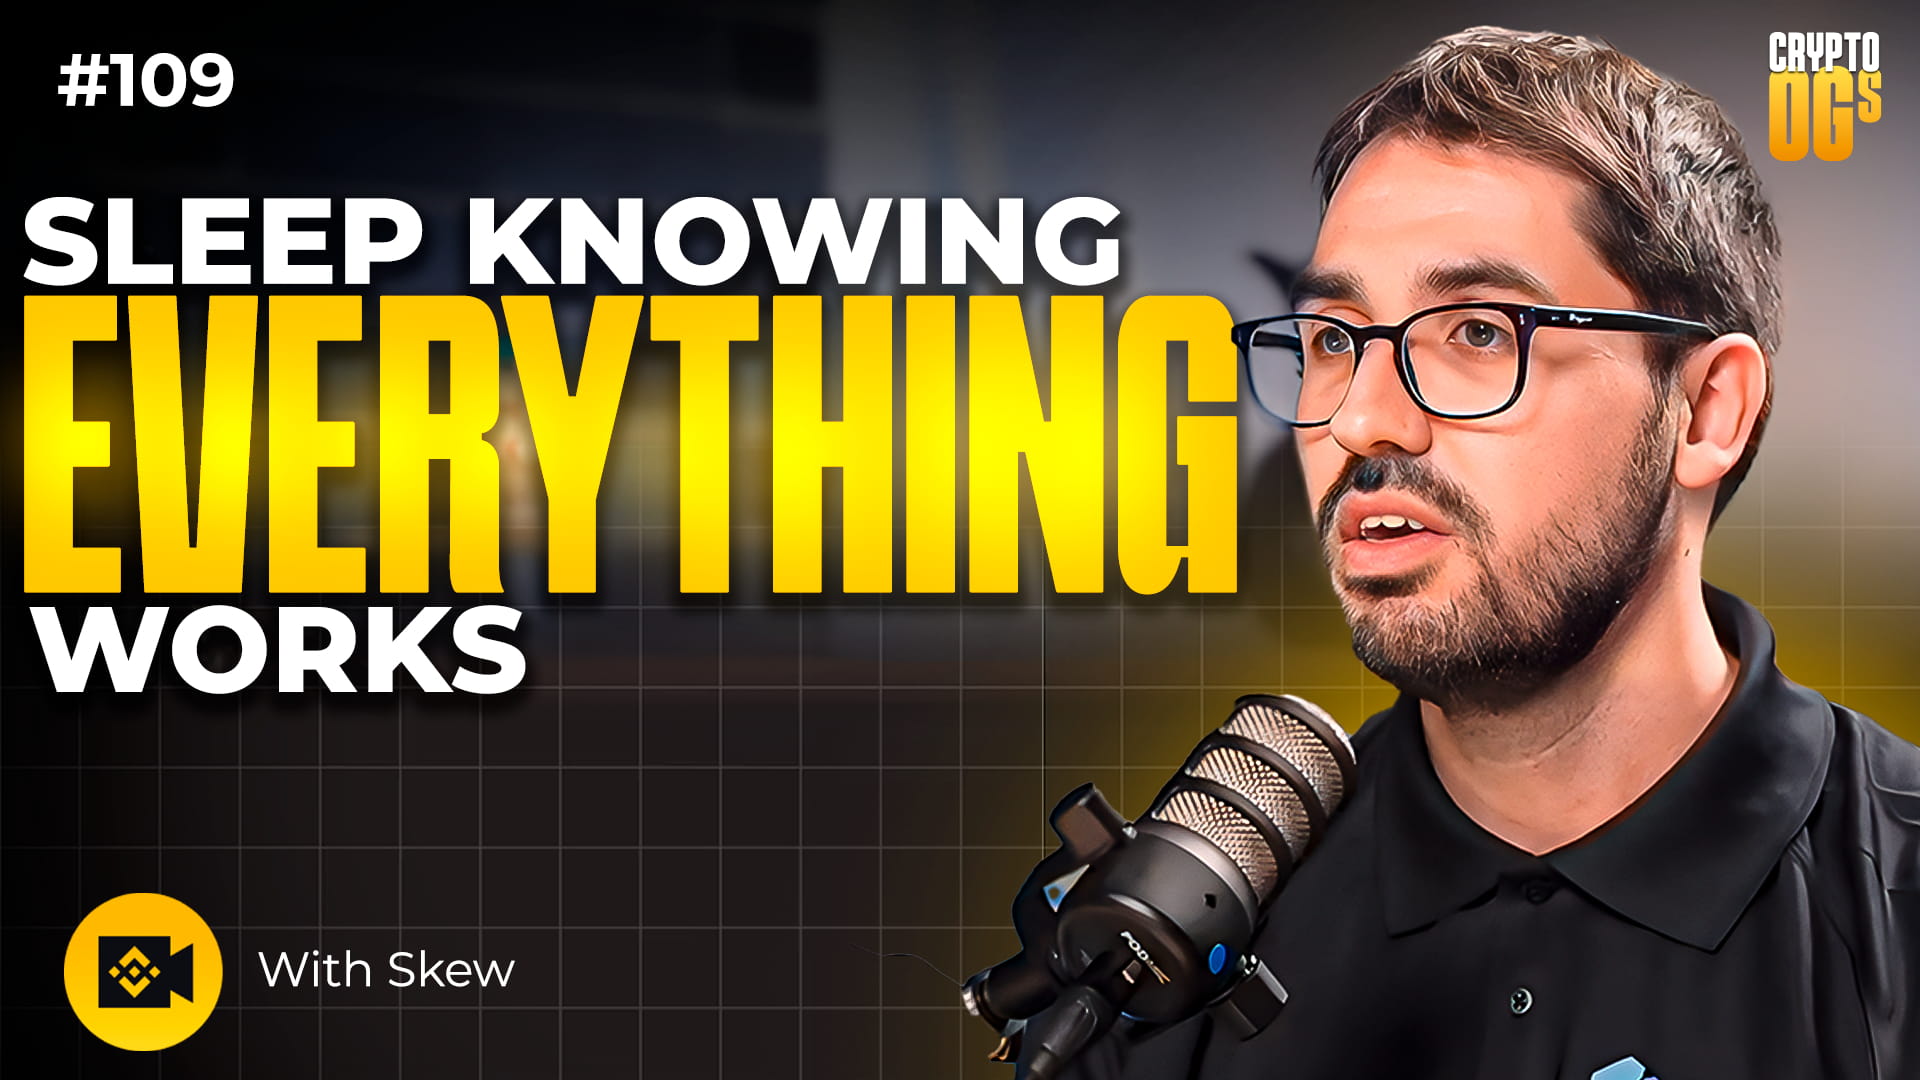 Sleep Knowing Everything works | Crypto OGs Ft Skew | Episode 109